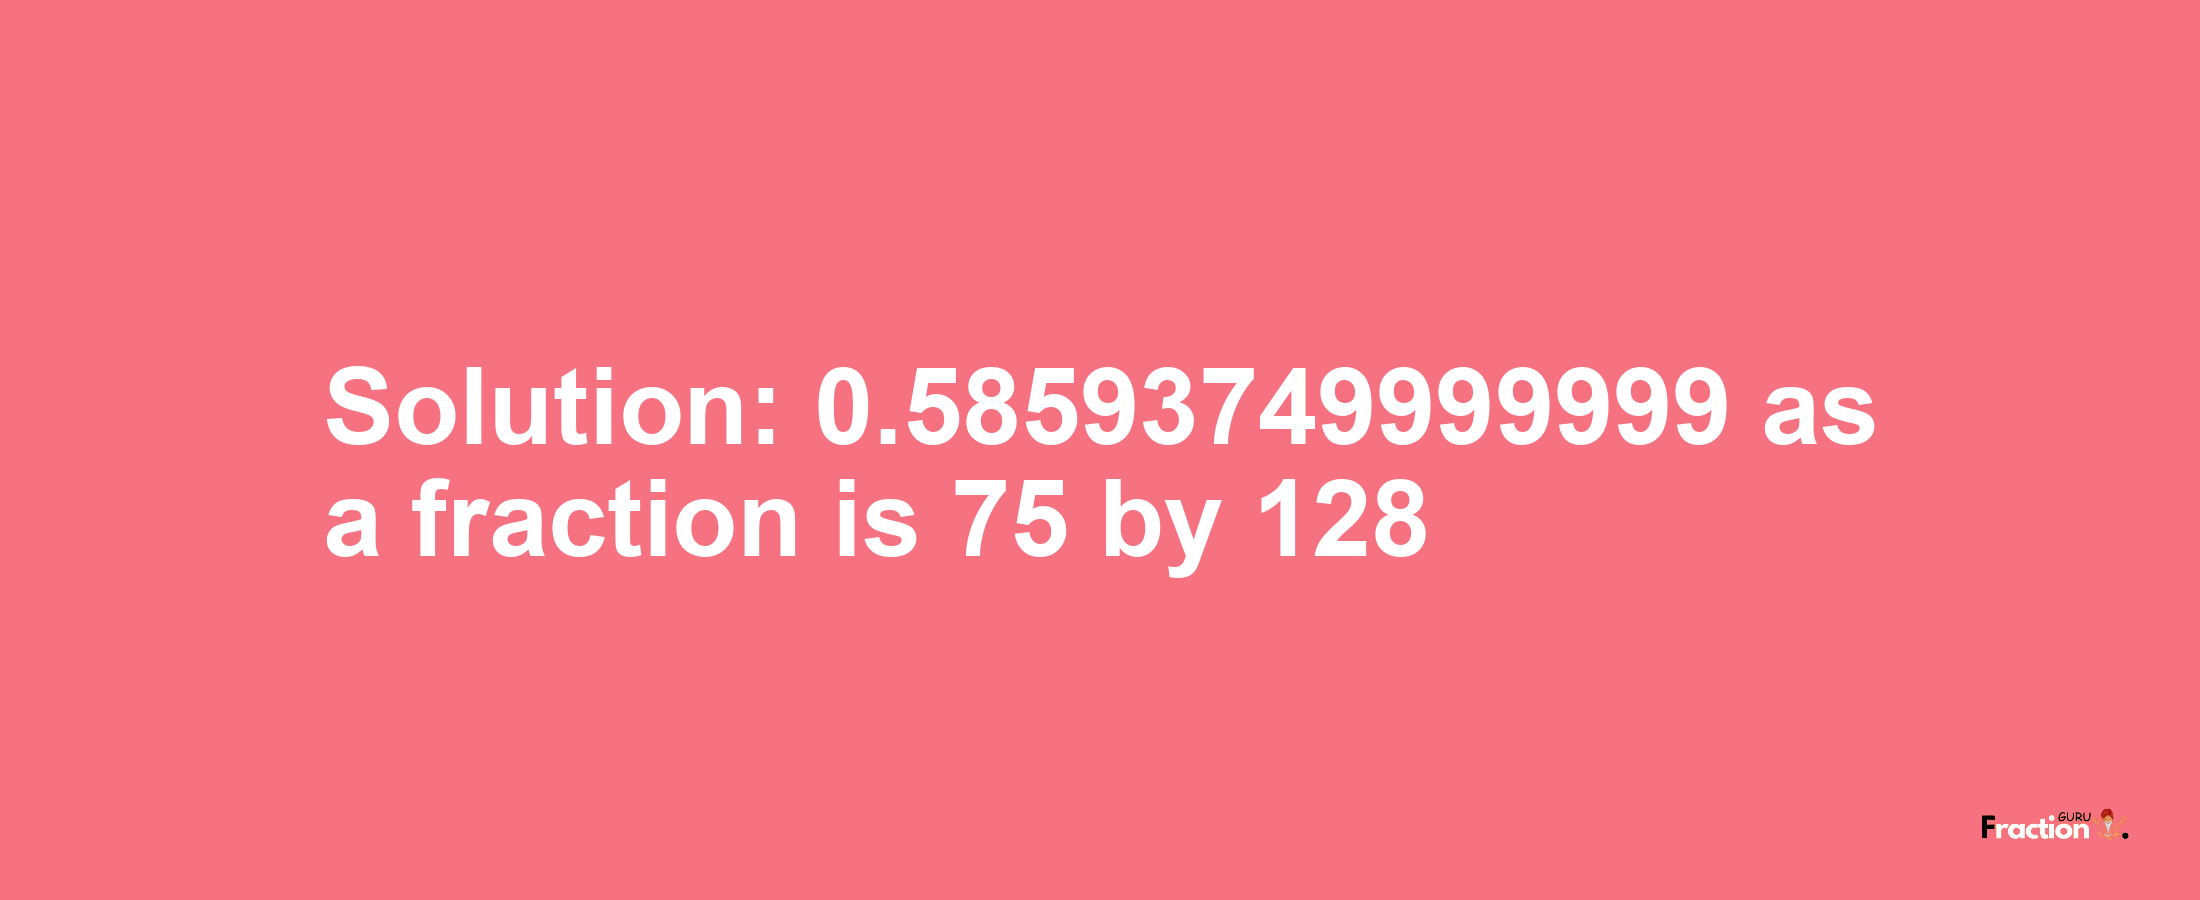 Solution:0.58593749999999 as a fraction is 75/128